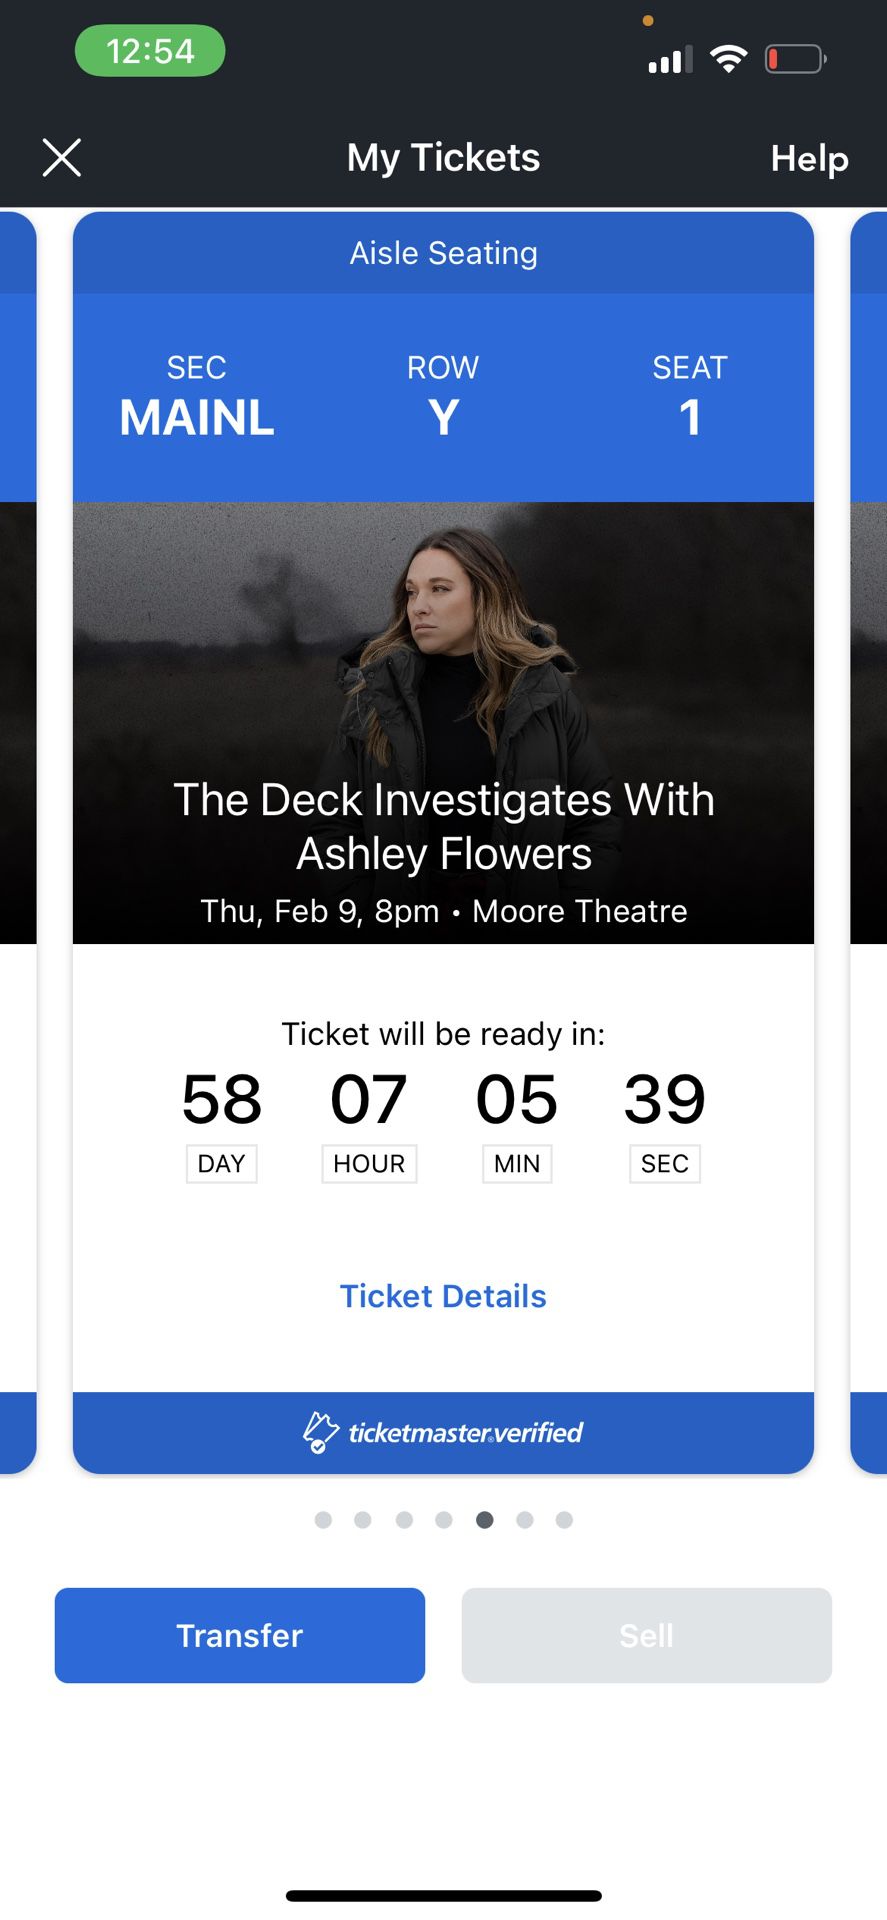 The deck investigates With Ashley Flowers Tickets